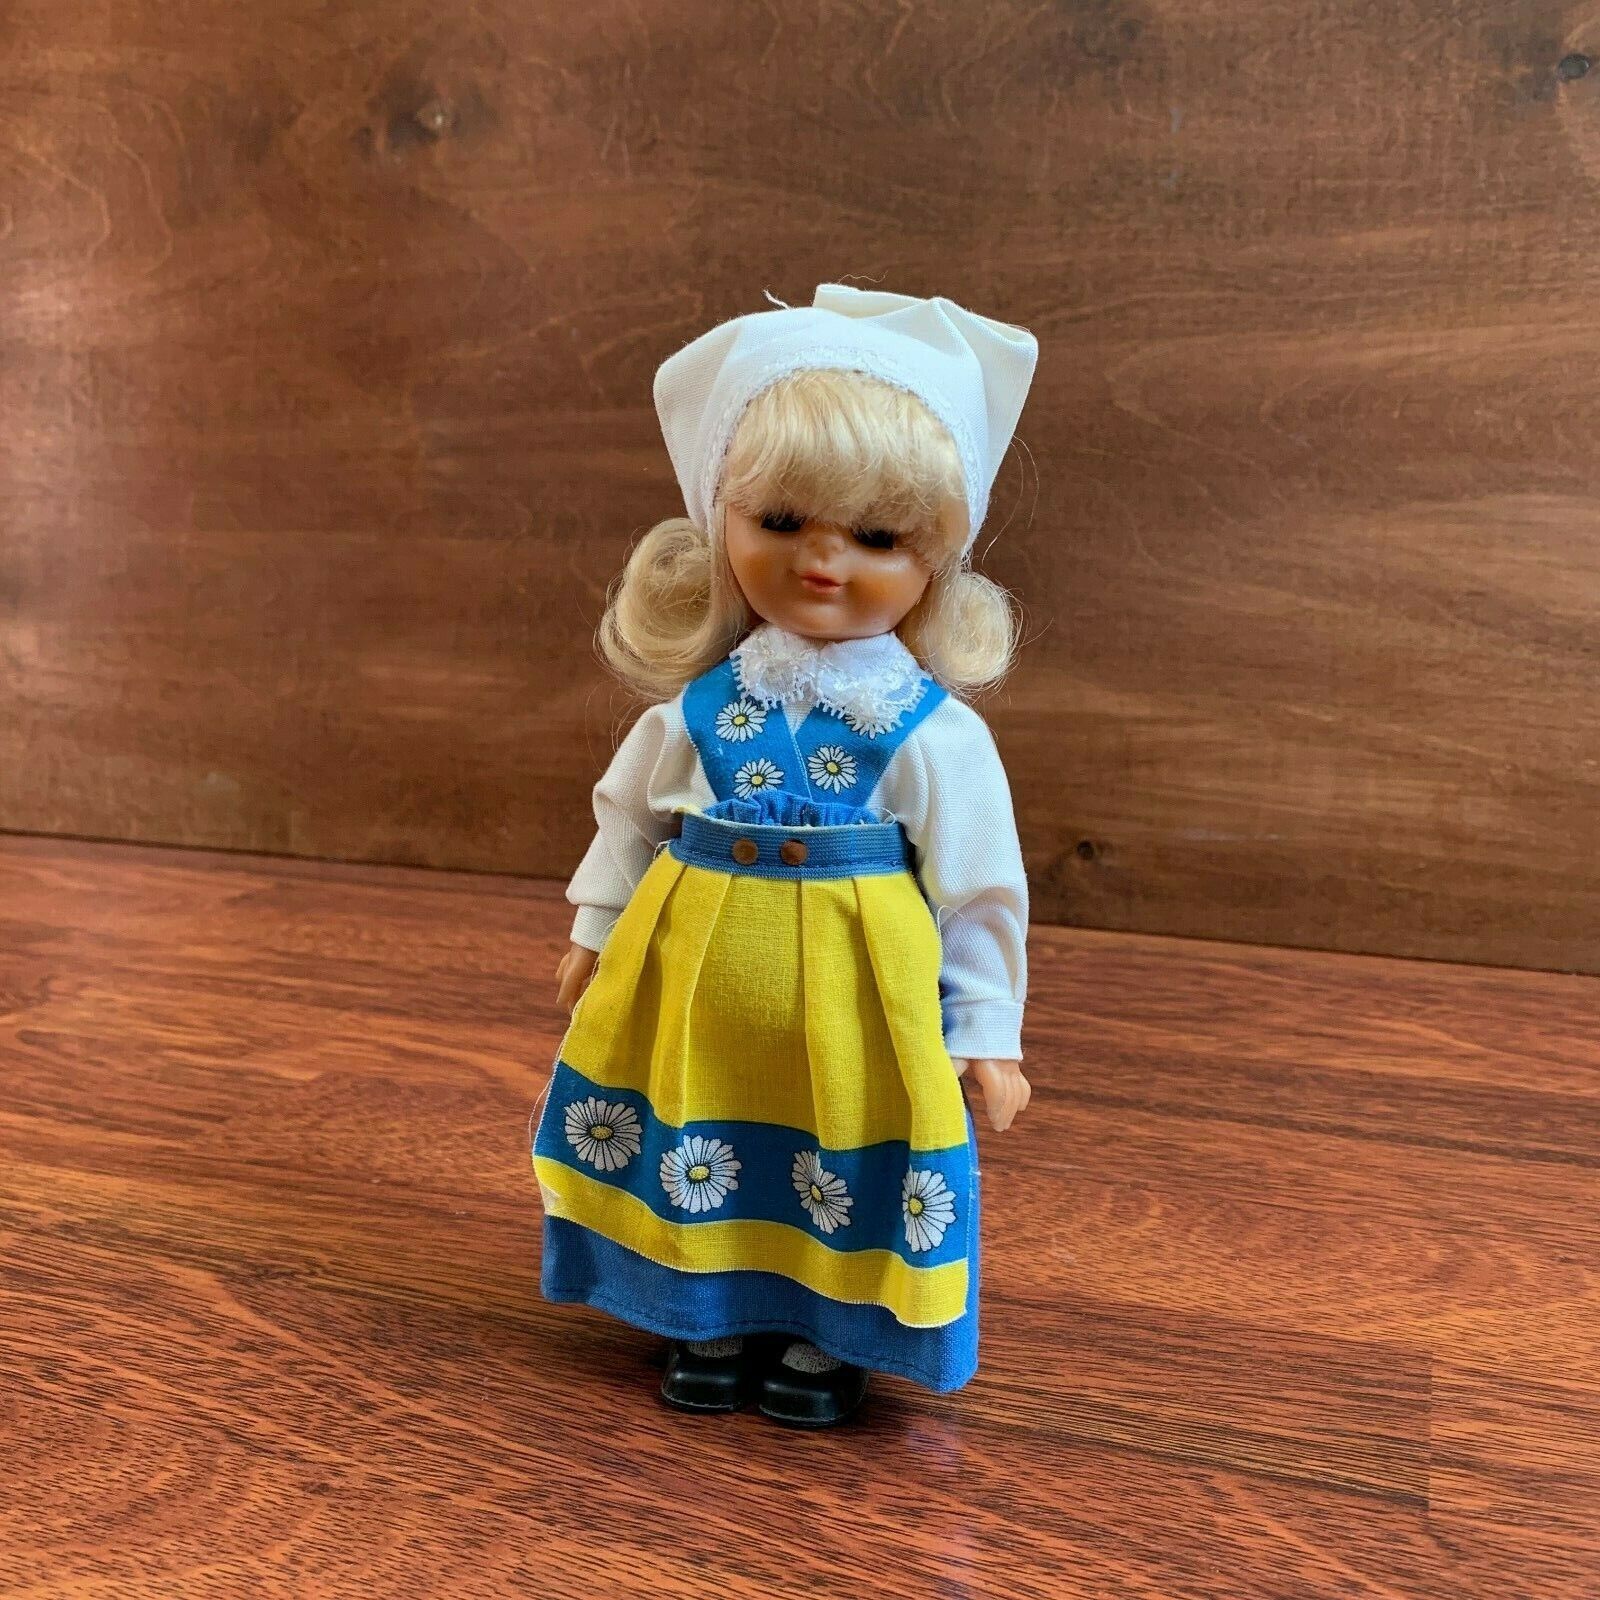 Dutch Girl Doll with blinking eyes - 9 inches tall